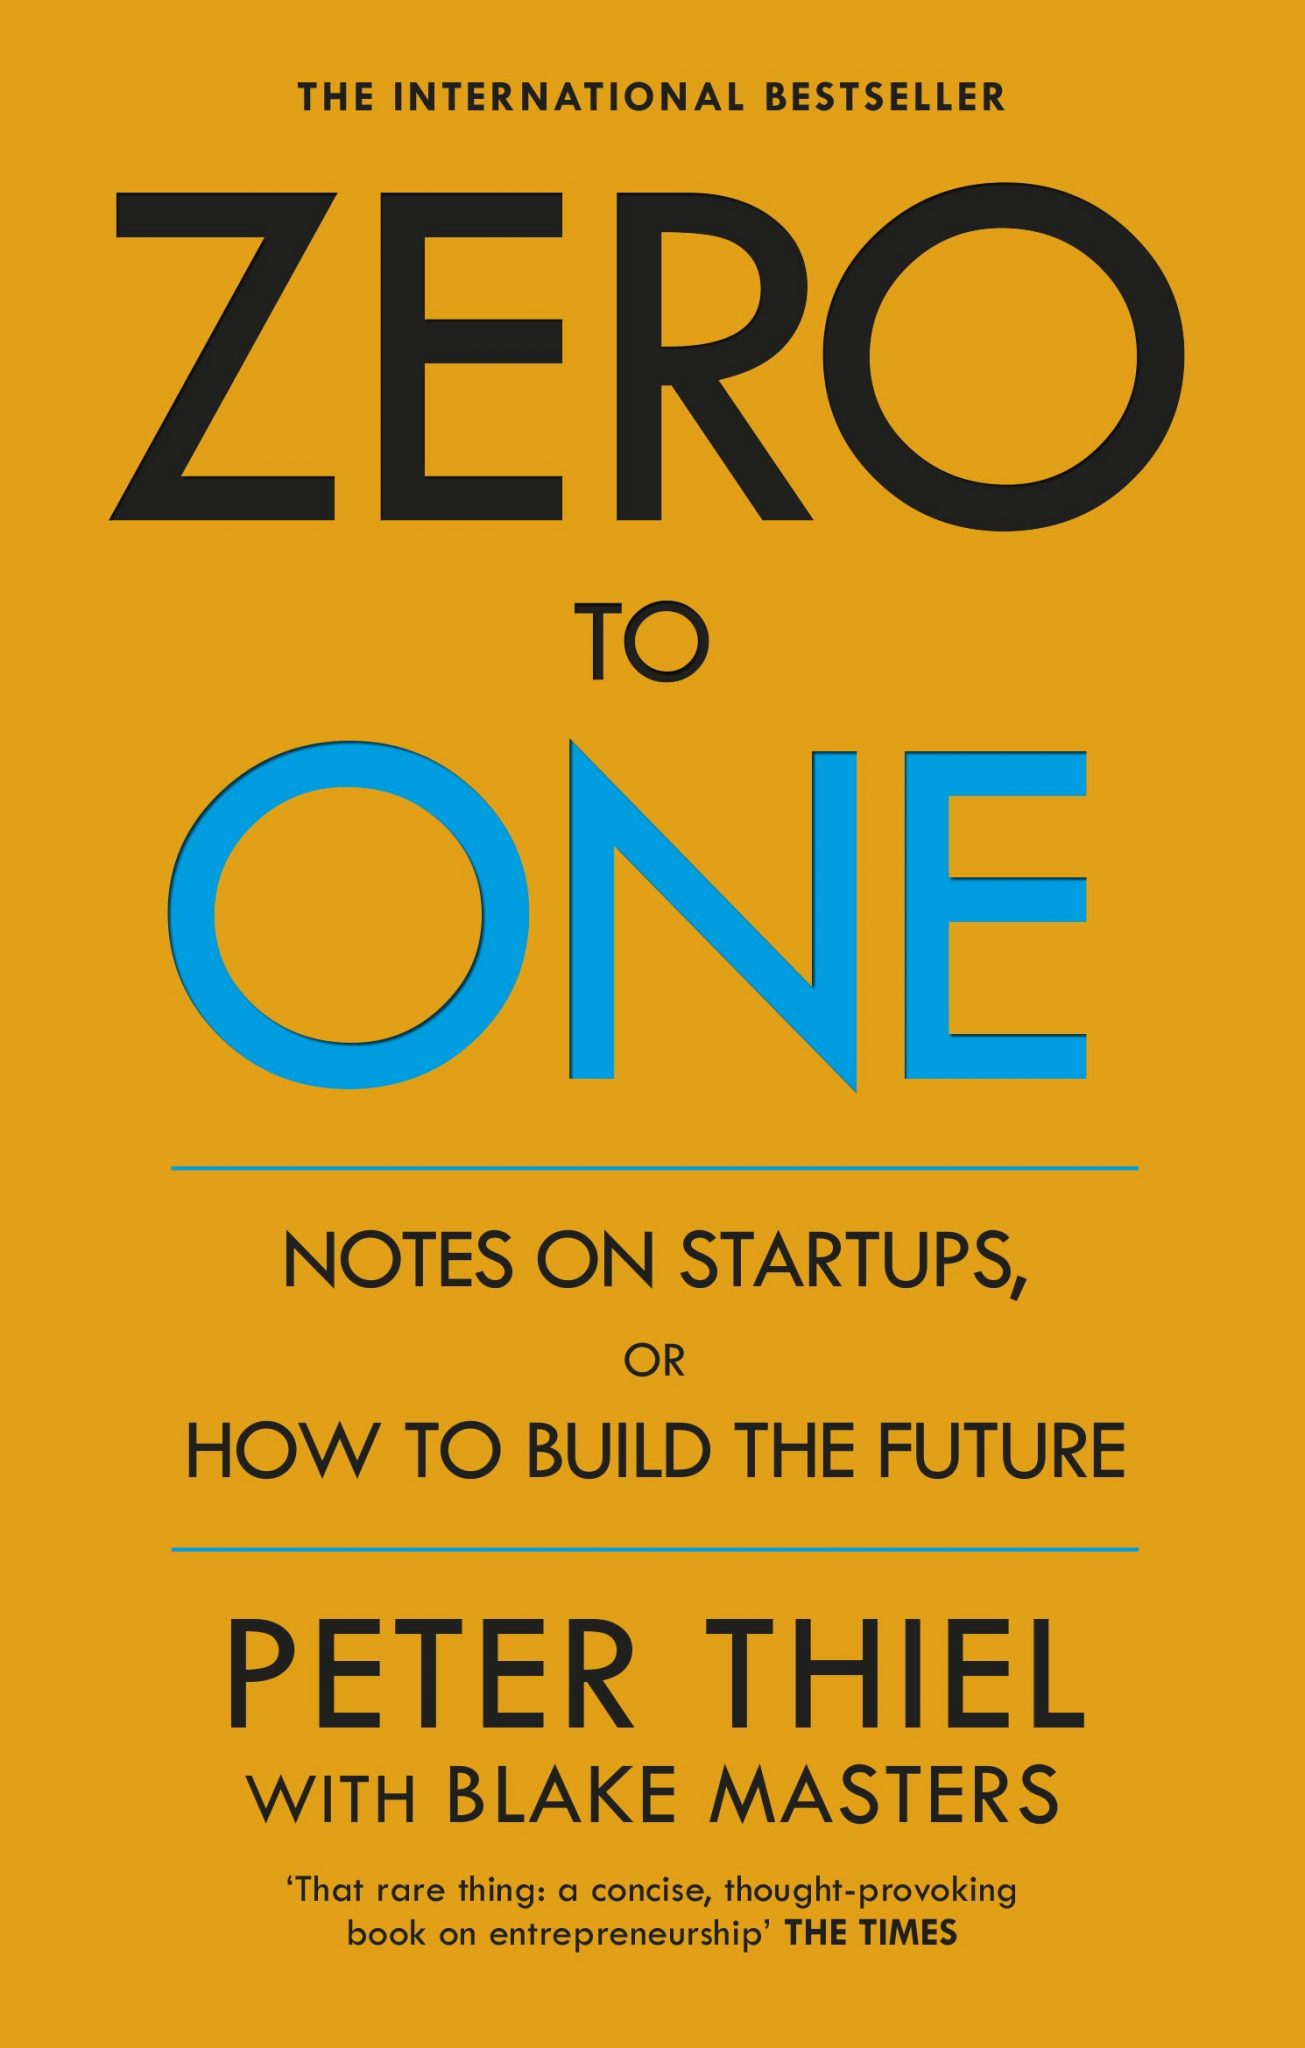 book review zero to one